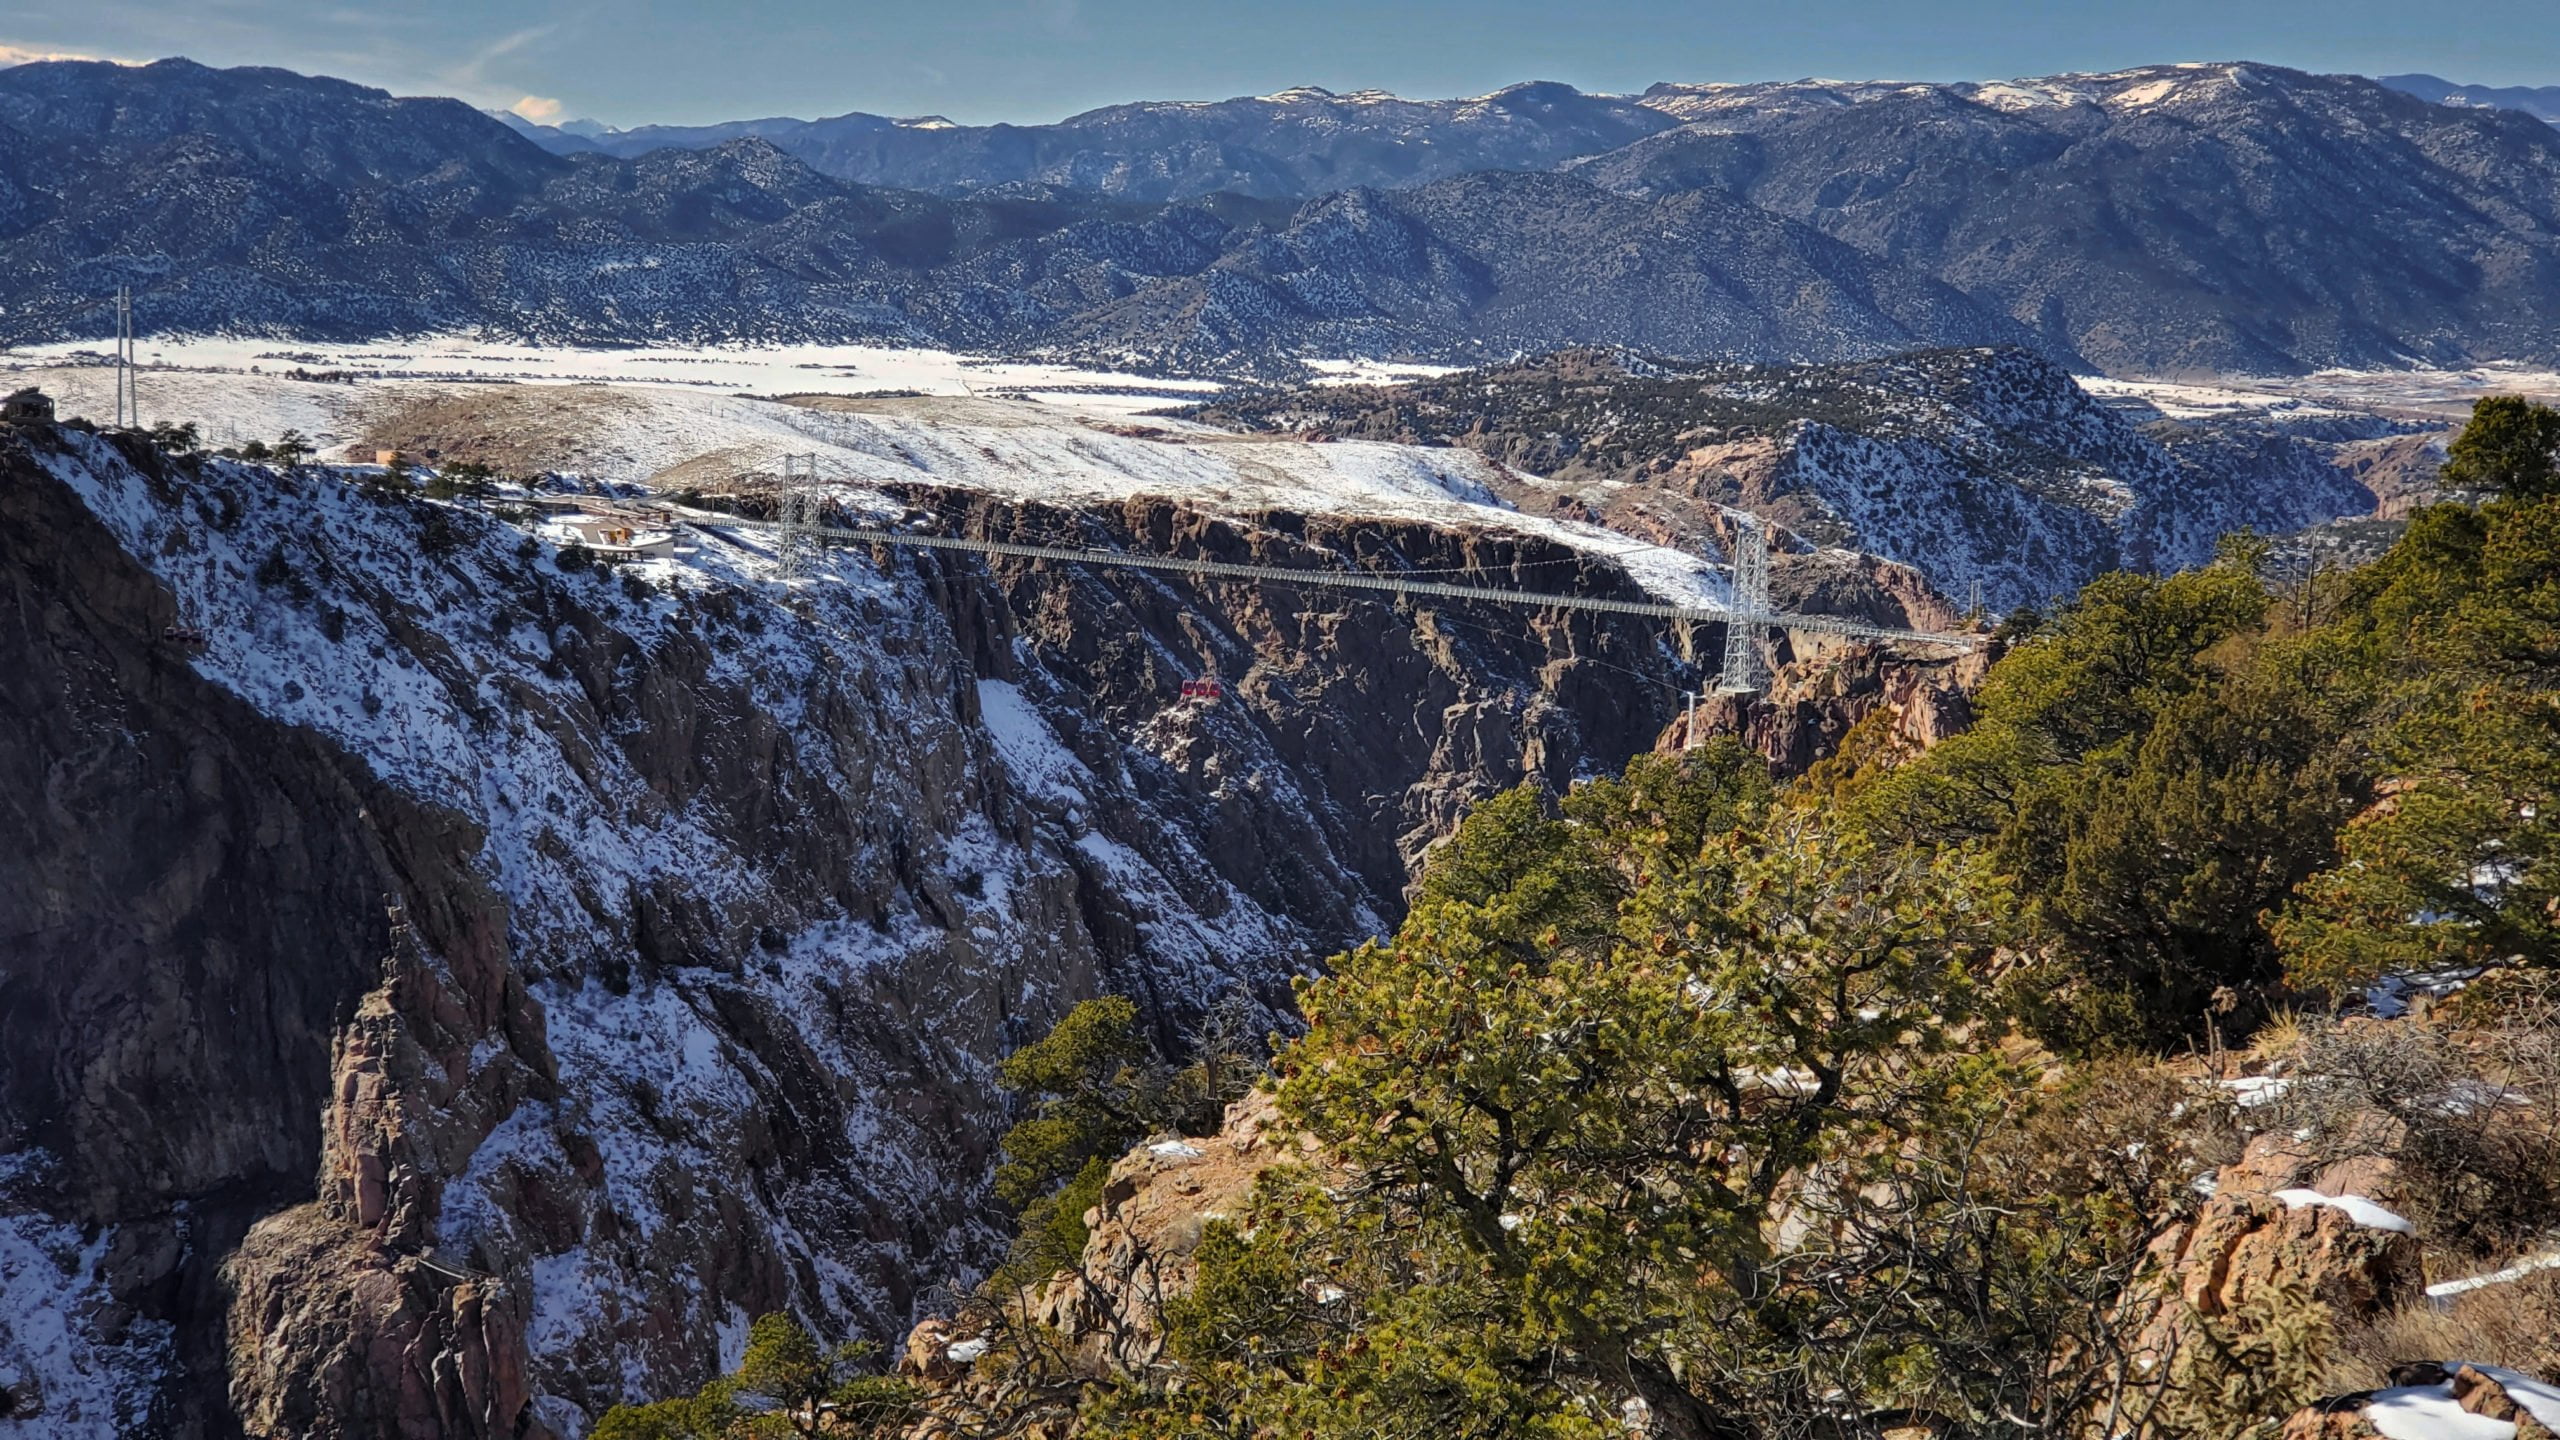 A view into the Royal Gorge from the trail